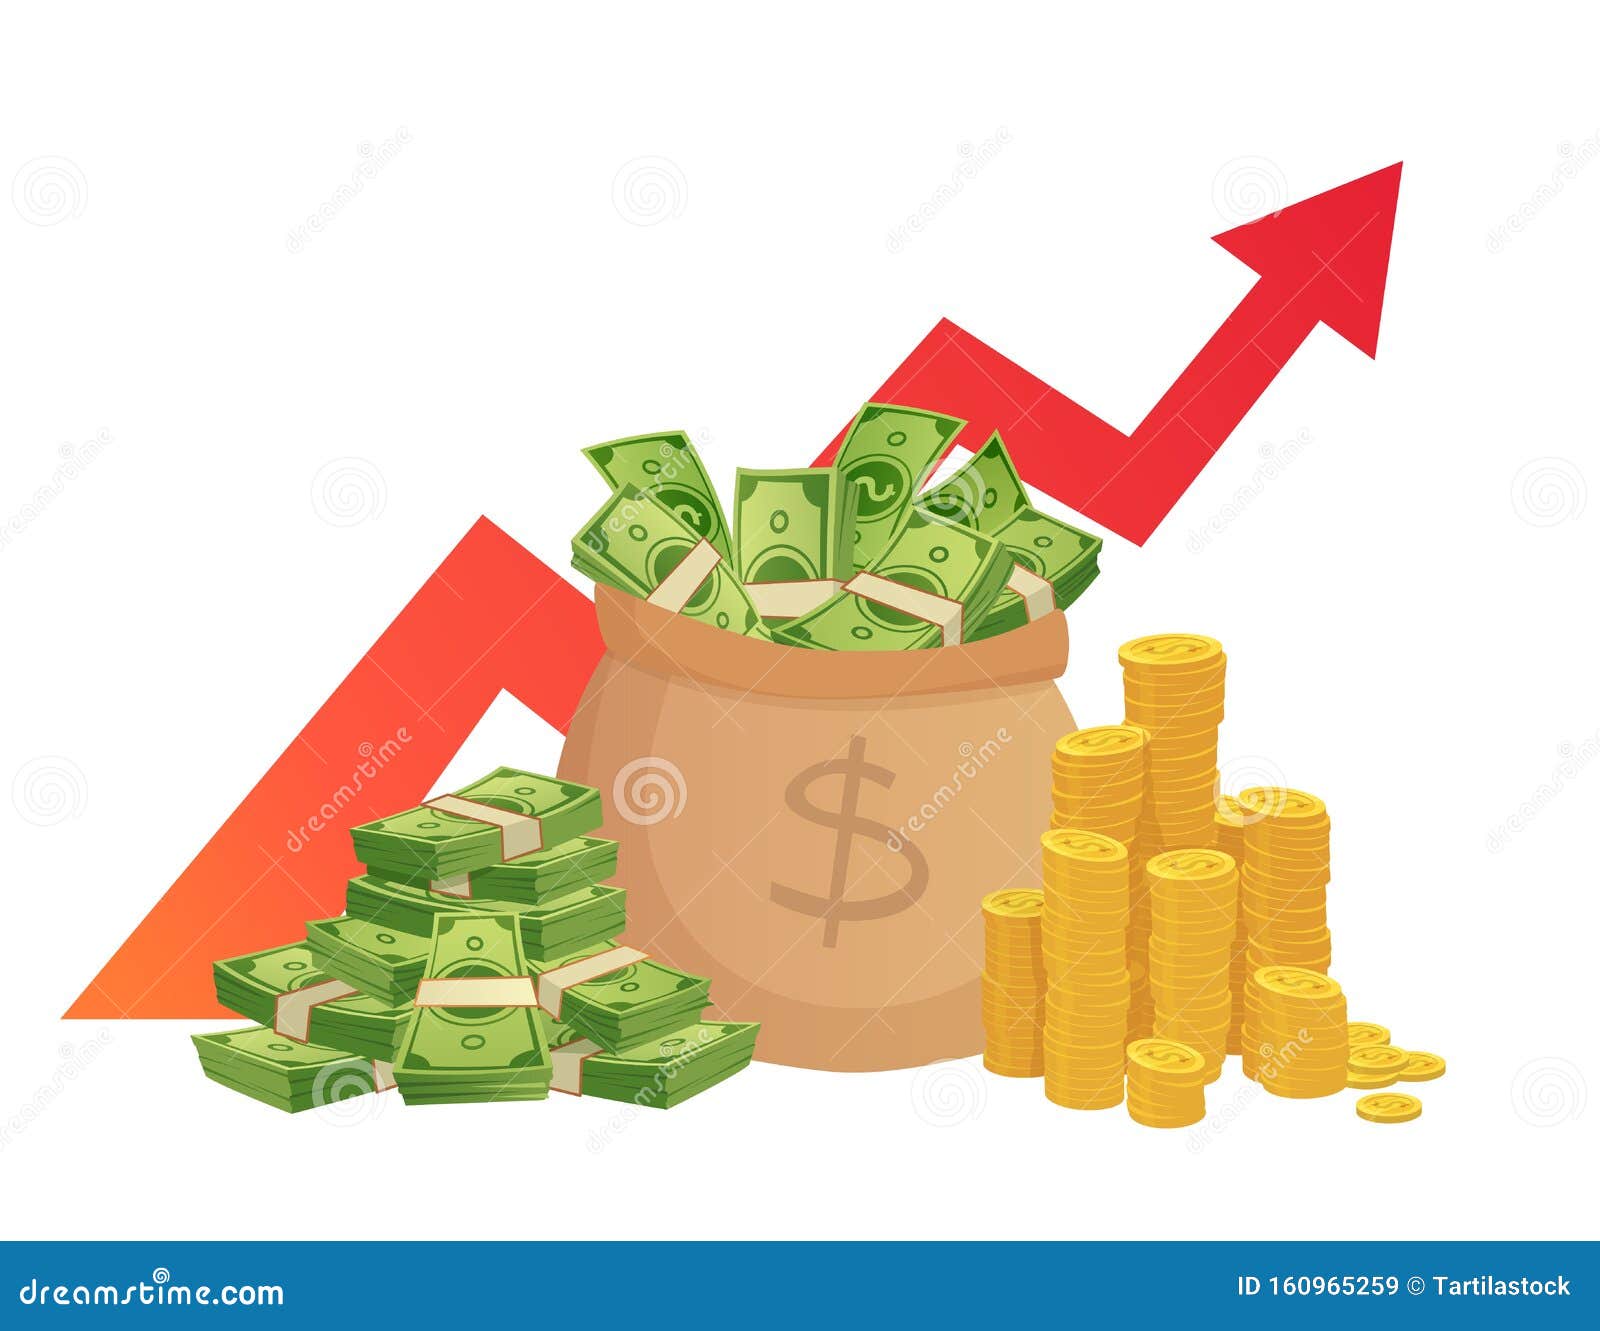 Cartoon Savings Value Growth. Money Profit Increase, Profitable Investments  Chart with Red Graph Arrow and Cash Pile Stock Vector - Illustration of  bond, economy: 160965259